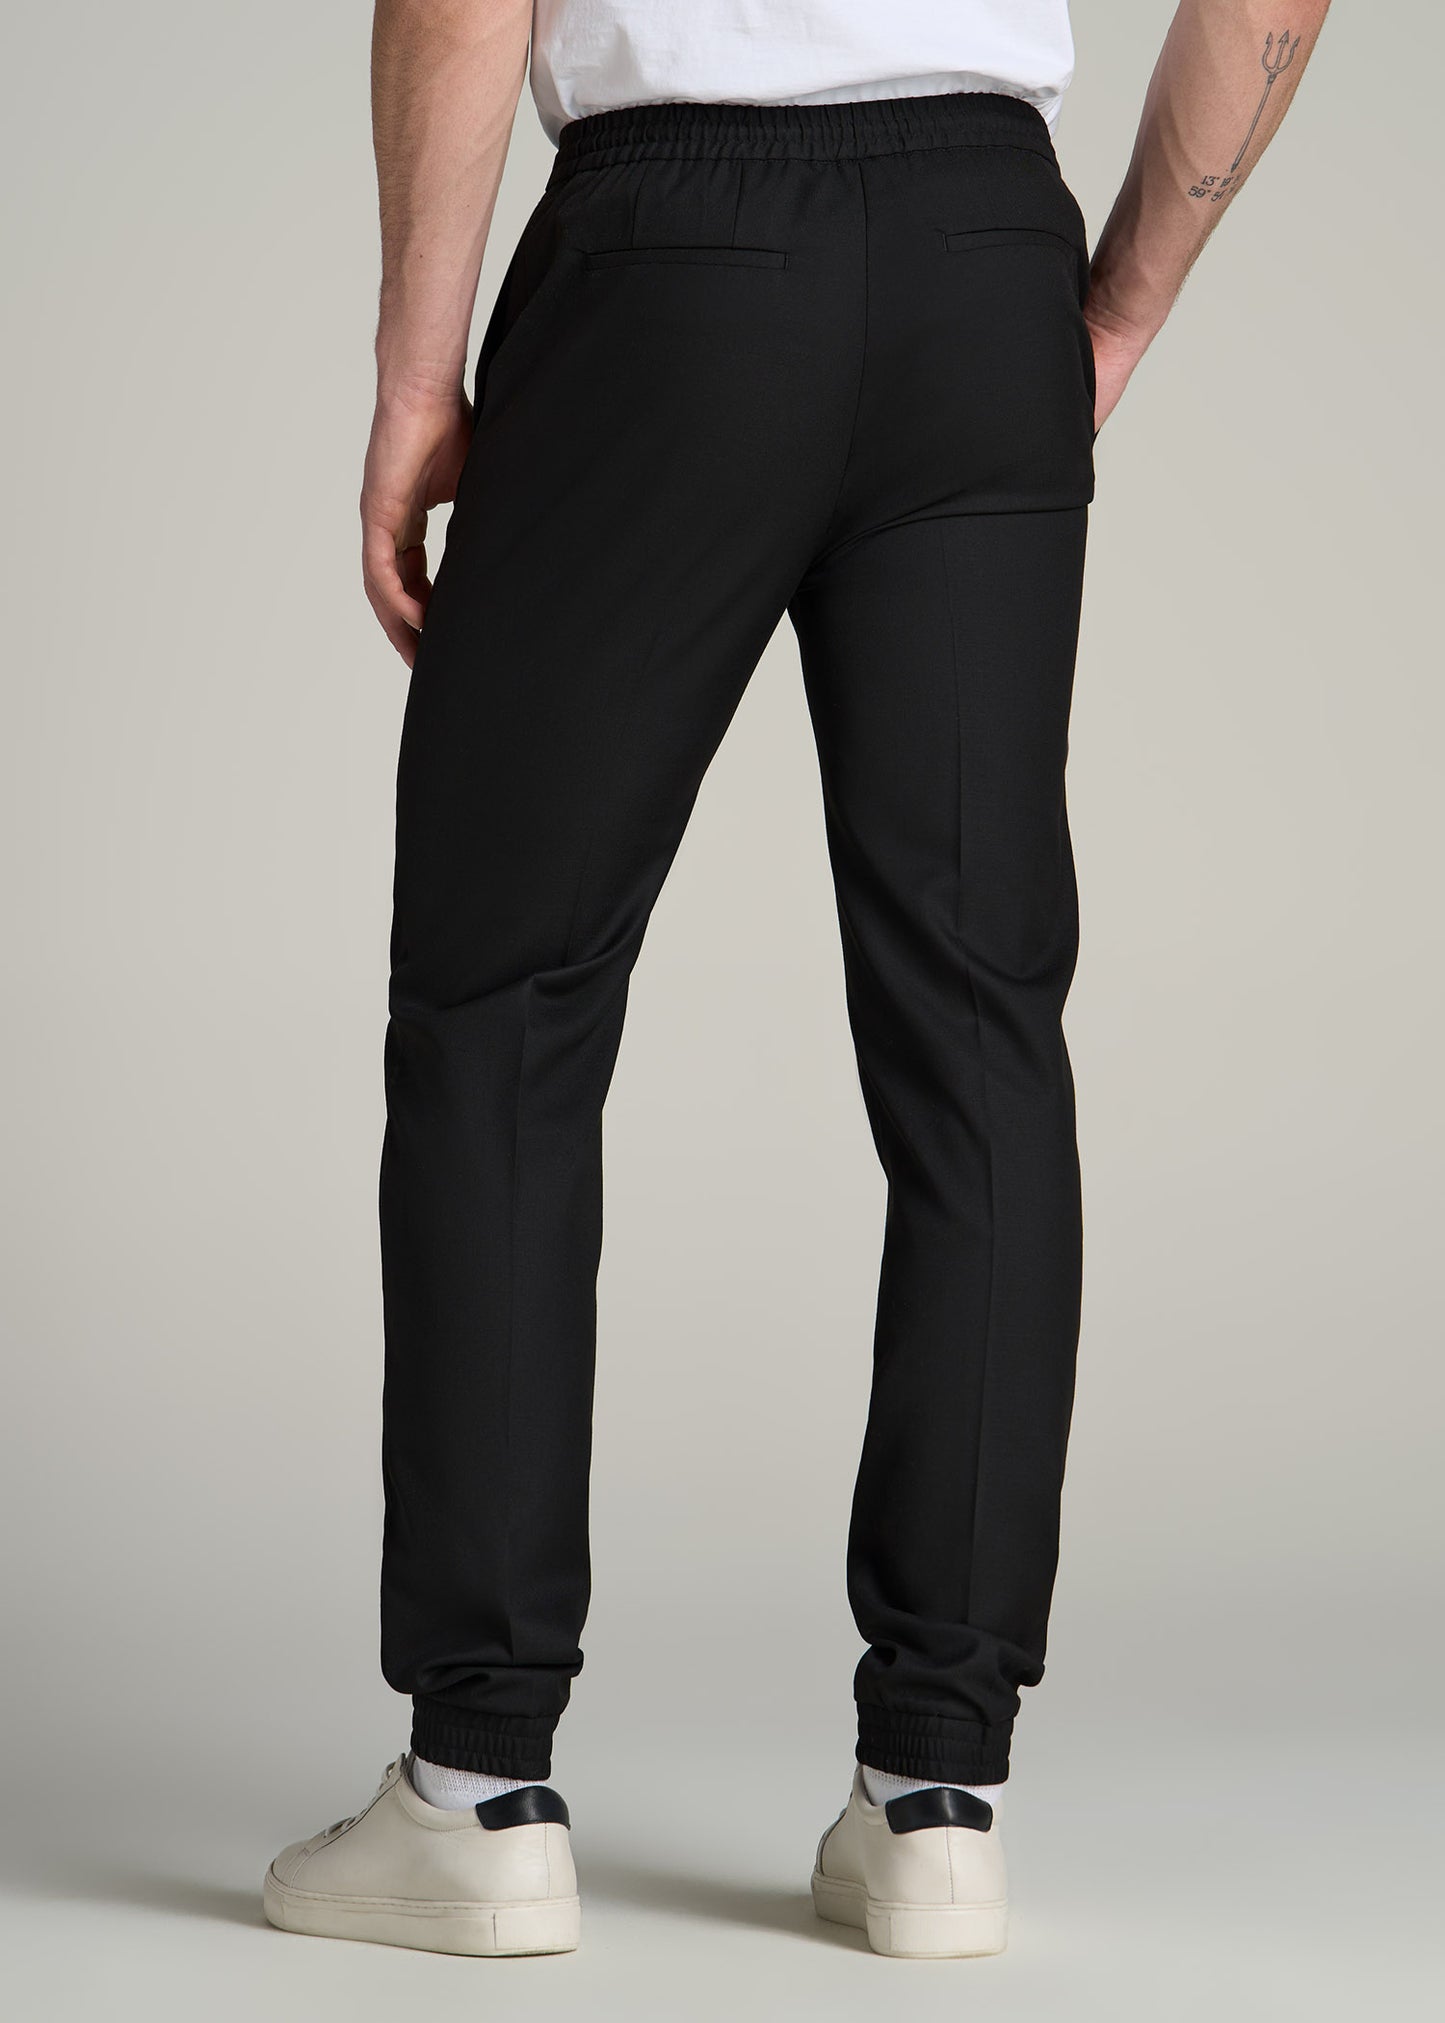 Womens Maroon Jogger Pants | Like Lululemon – MomMe and More